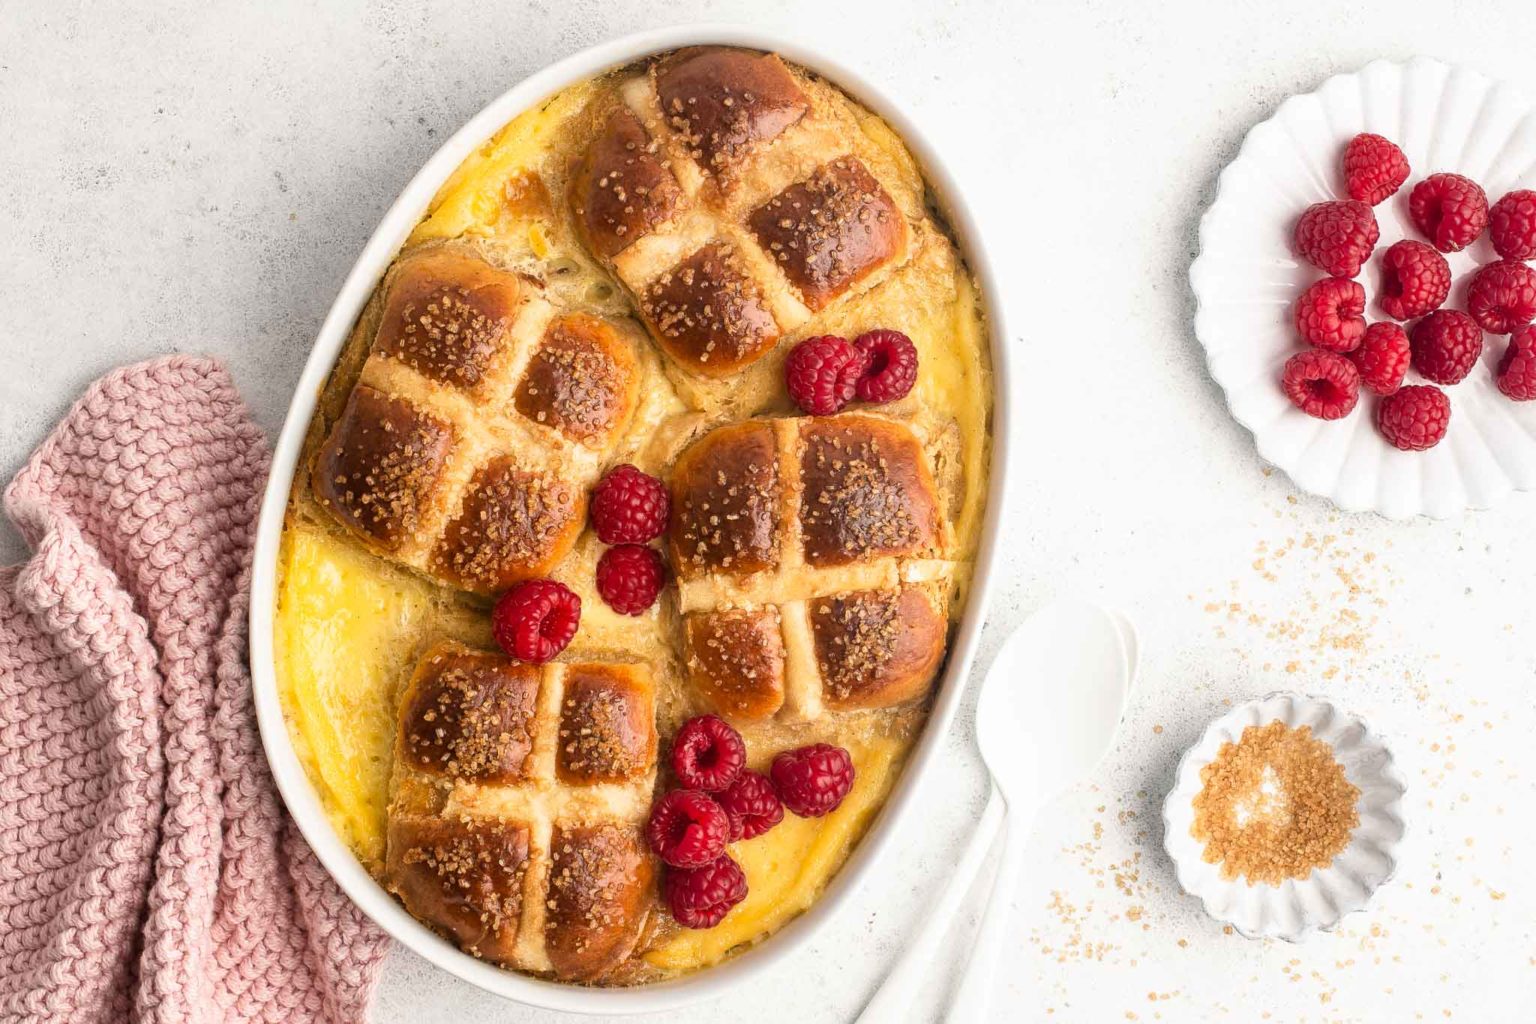 Hot Cross Bun Bread and Butter Pudding with step-by-step photos